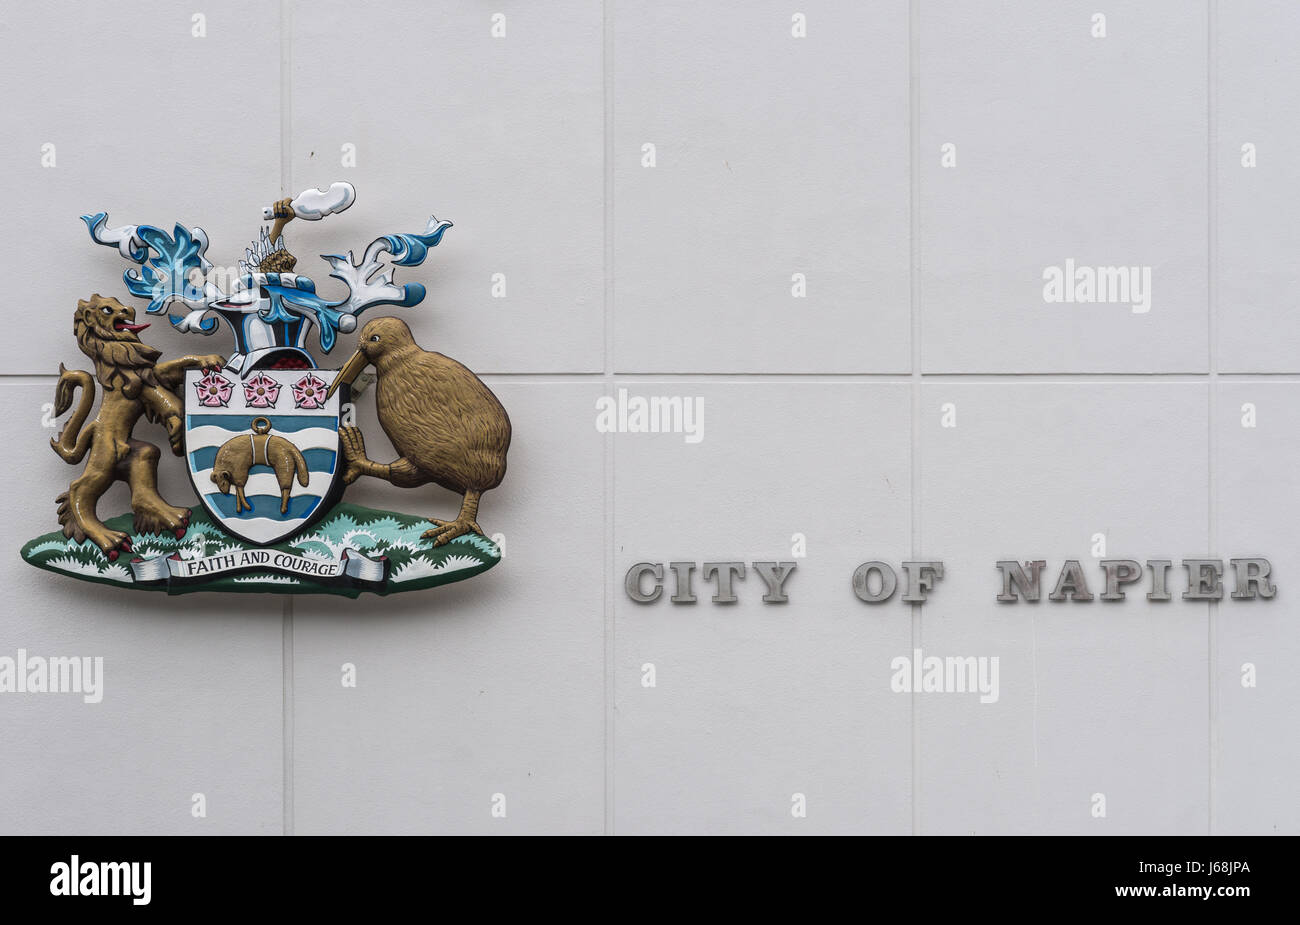 Napier, New Zealand - March 9, 2017: Closeup of colorful Coat of Arms and name of the city on the white wall of city hall. Stock Photo